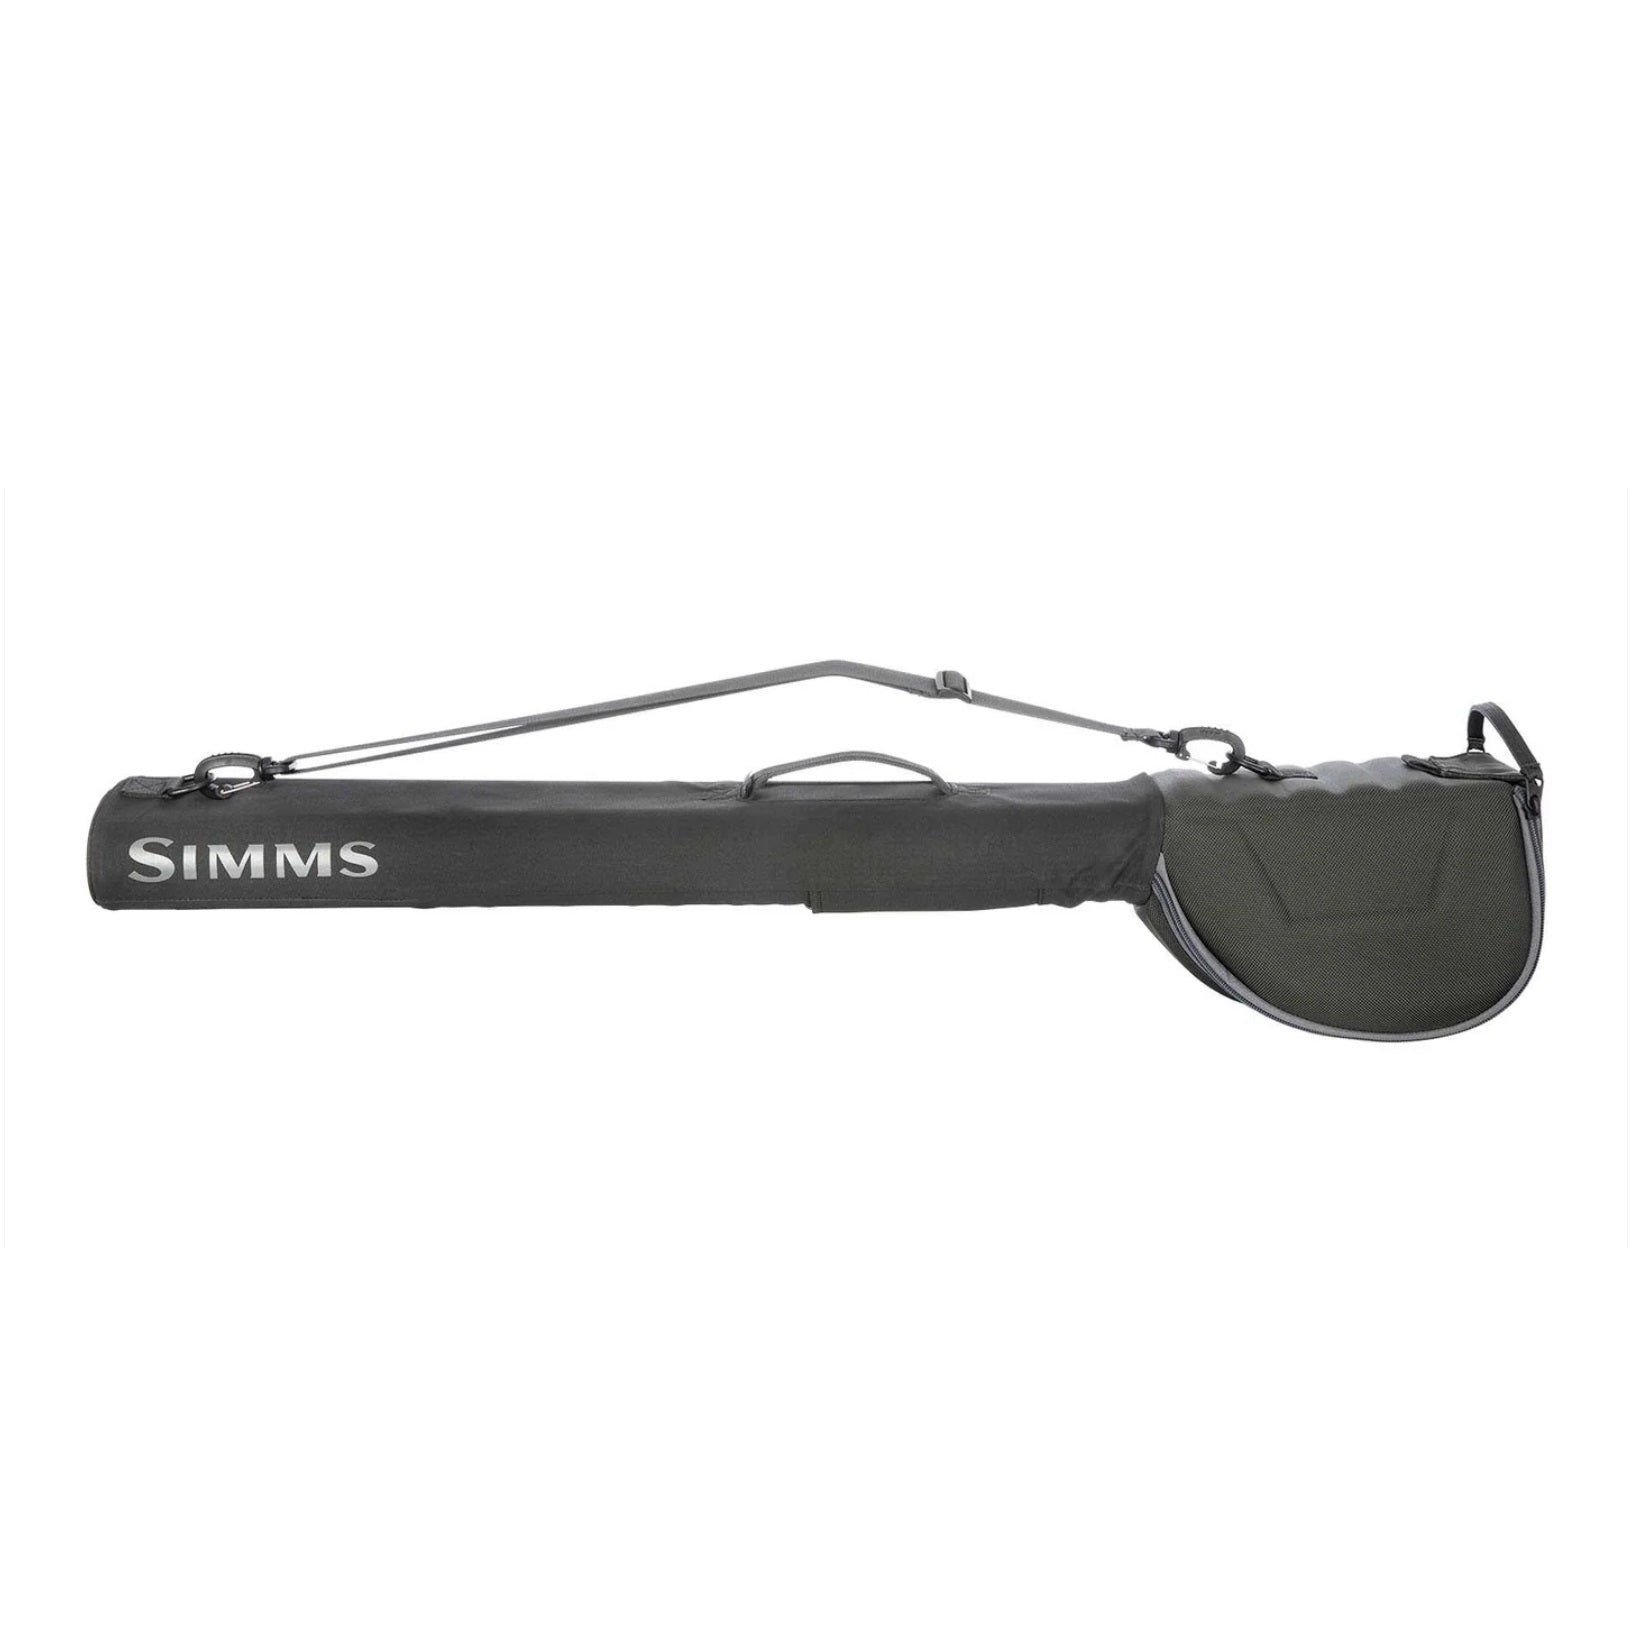 Simms GTS Double Fly Fishing Rod/Reel Vault